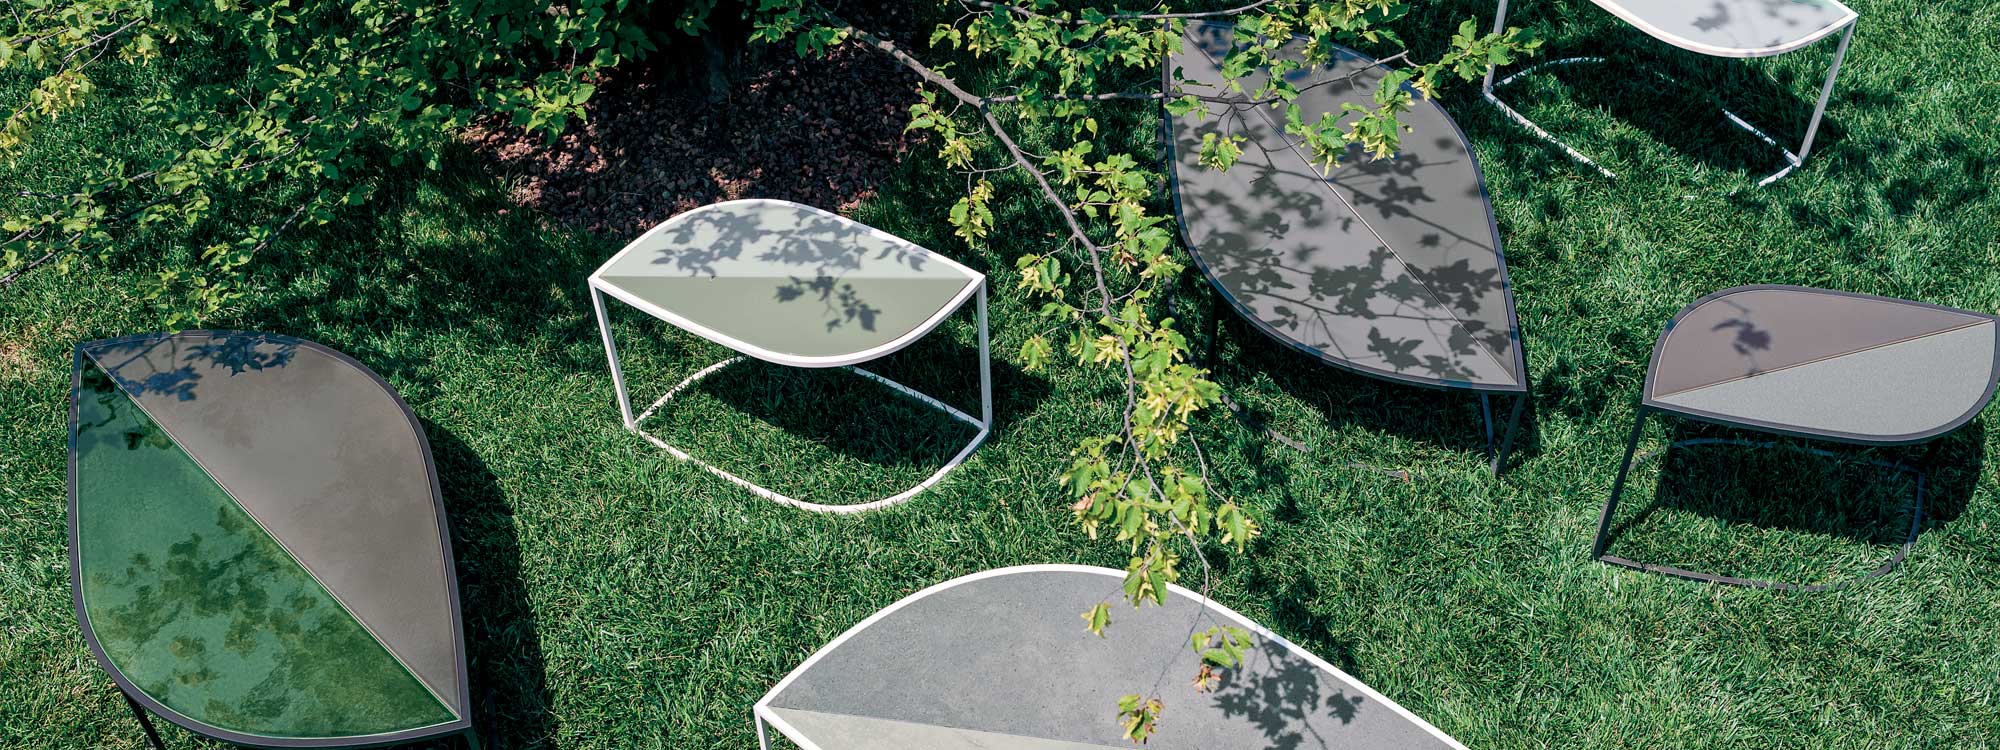 Collection of Leaf garden side tables shown on grassy lawn.